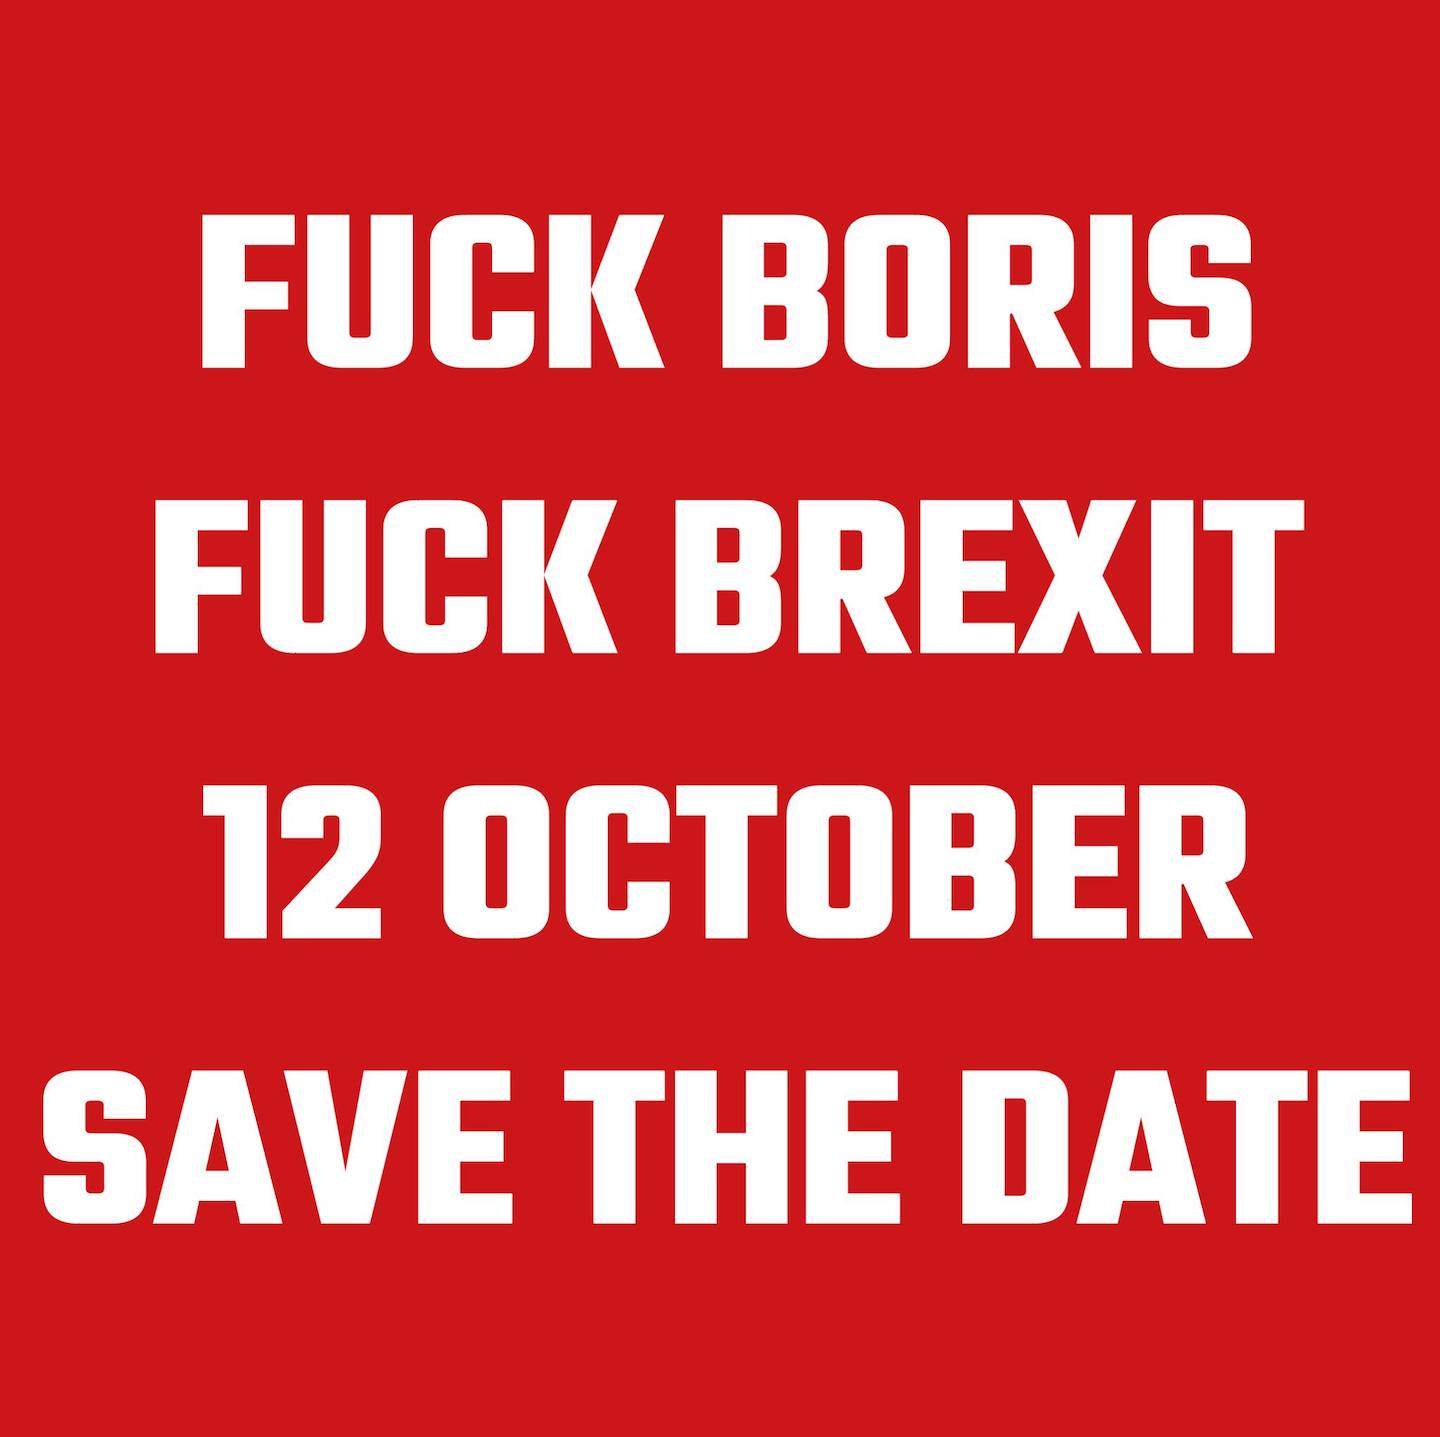 Artwork requests 'really famous DJs' to play Fuck Boris Fuck Brexit protest party in London image